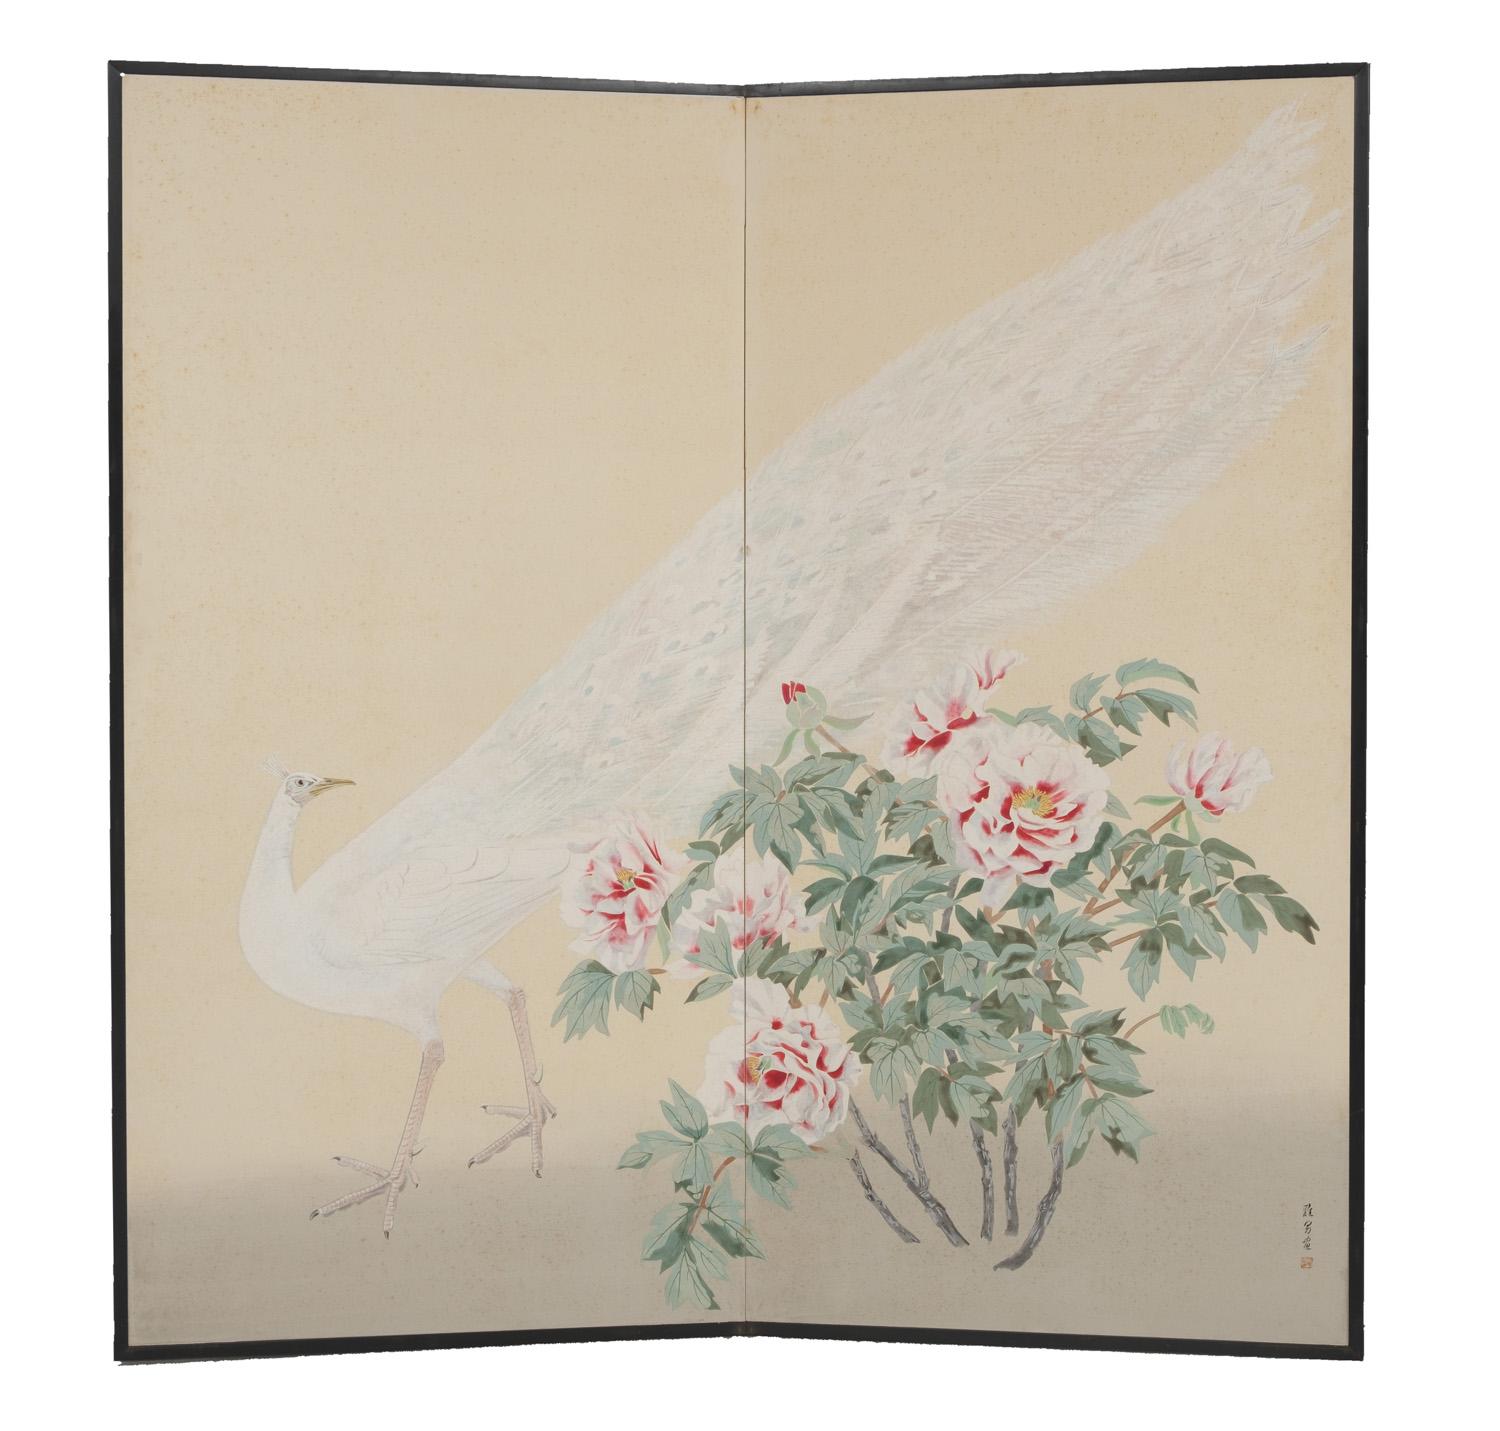 Showa Pair of Fabulous Japanese White Peacock Two-Fold Folding Screen Room-Dividers